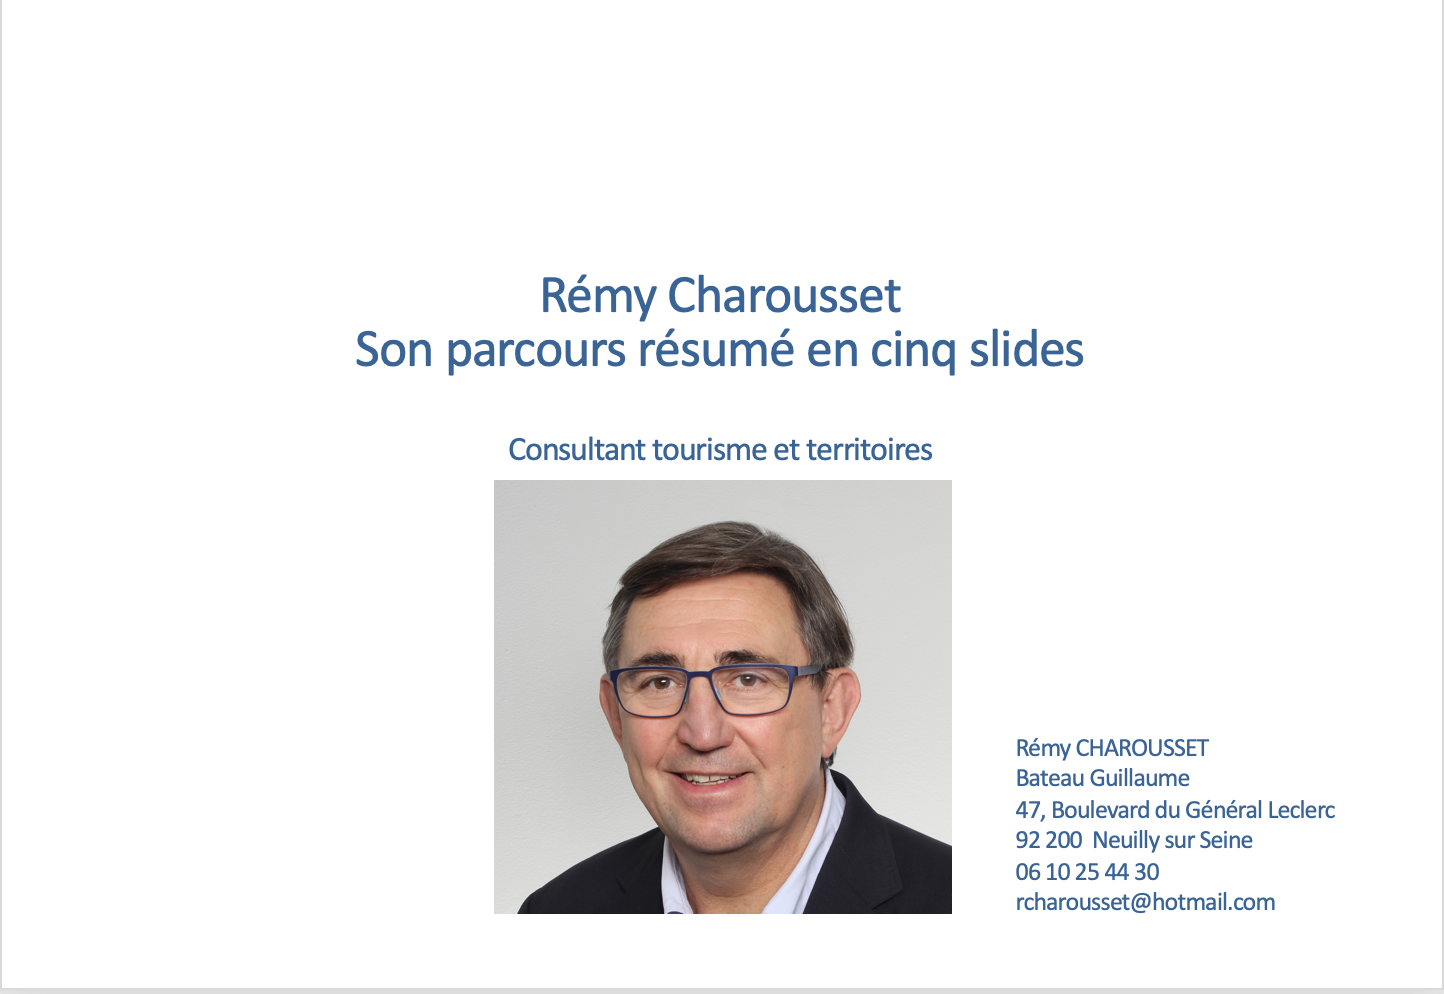 OS remy charousset